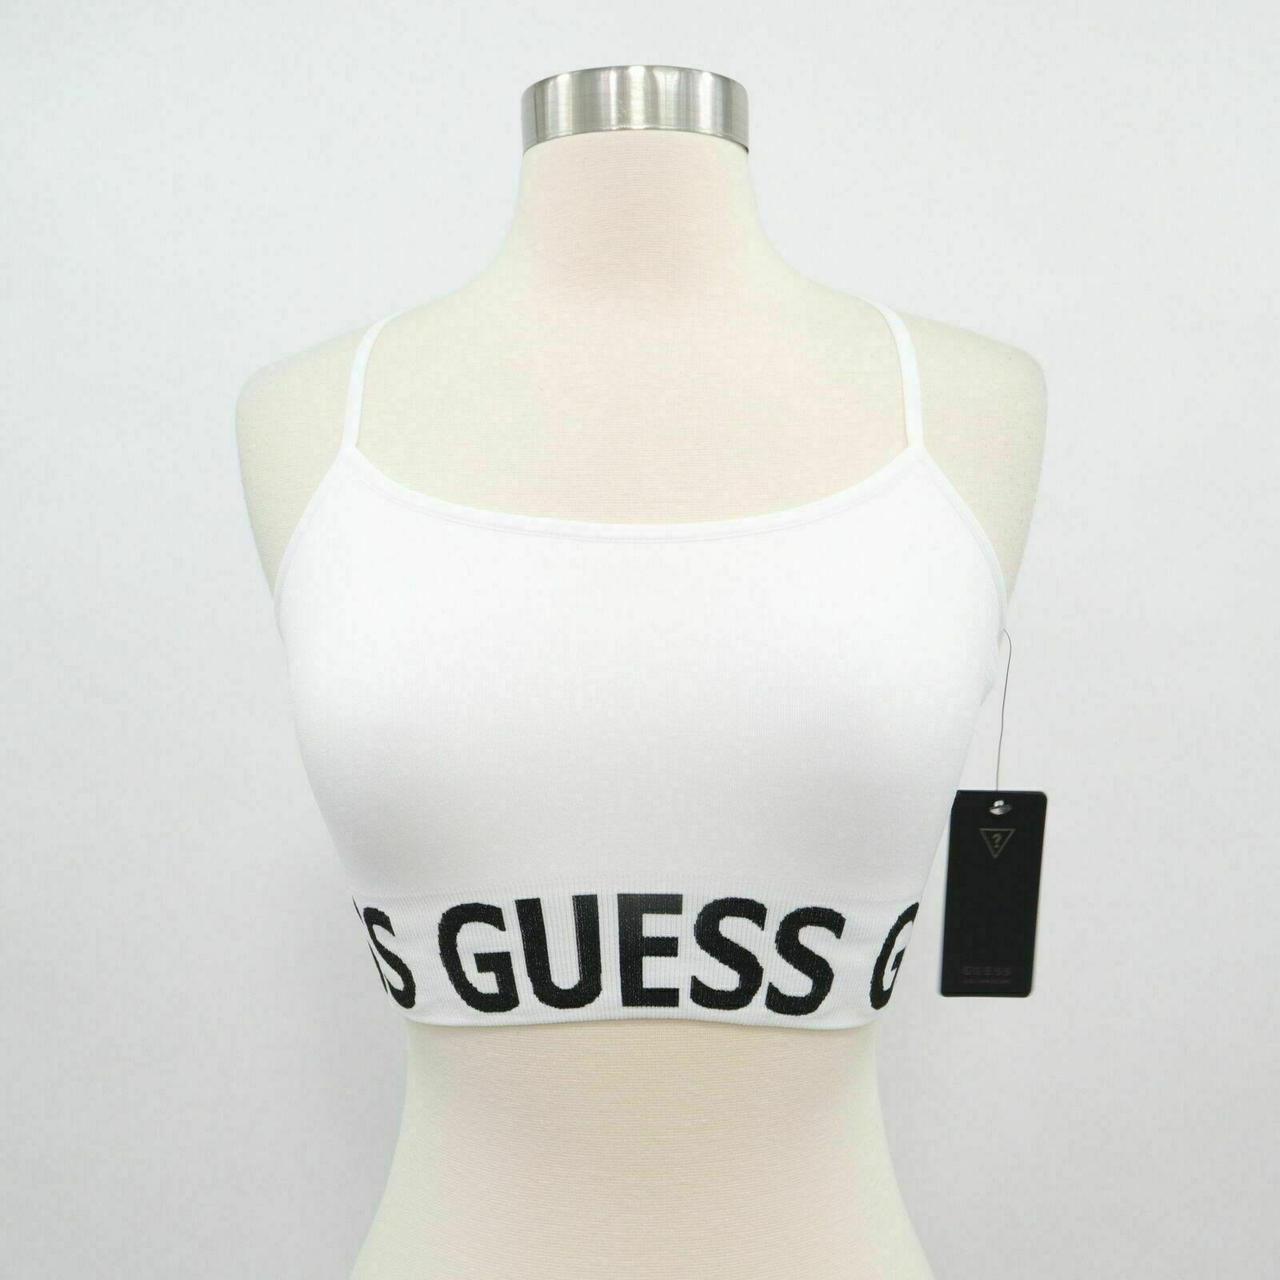 Guess Women's White Vests-tanks-camis